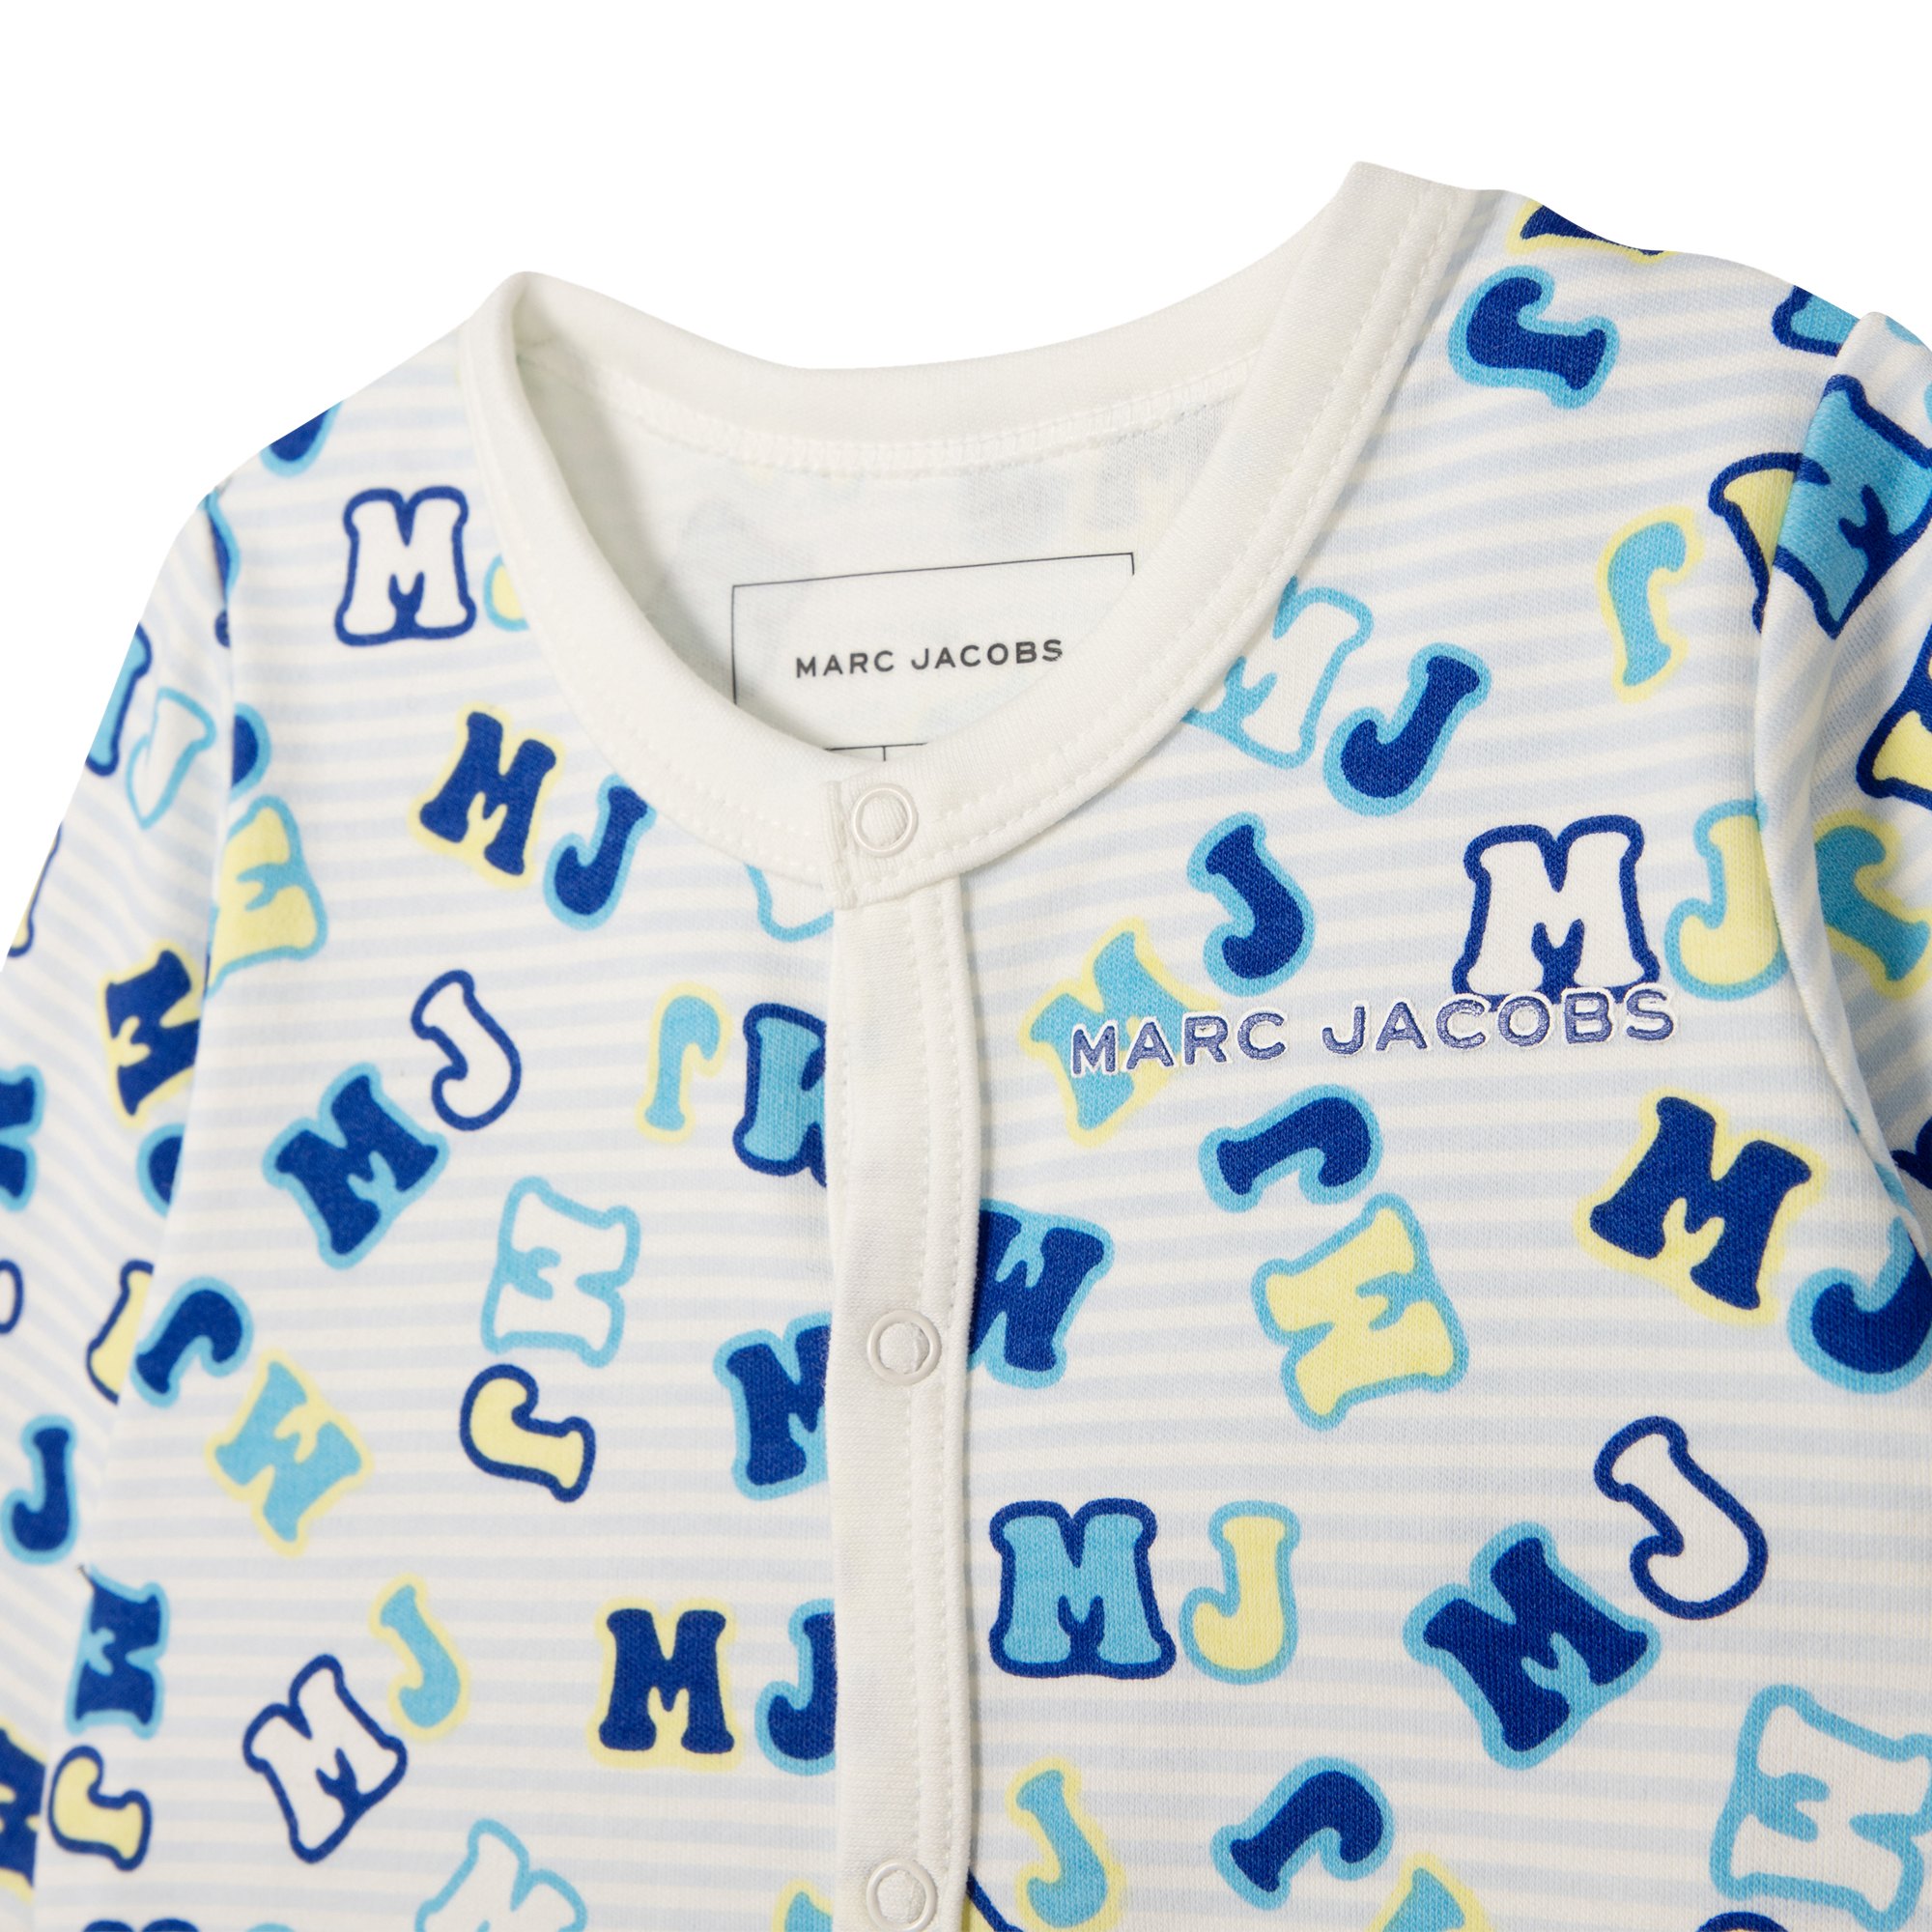 Footless cotton pyjamas MARC JACOBS for UNISEX